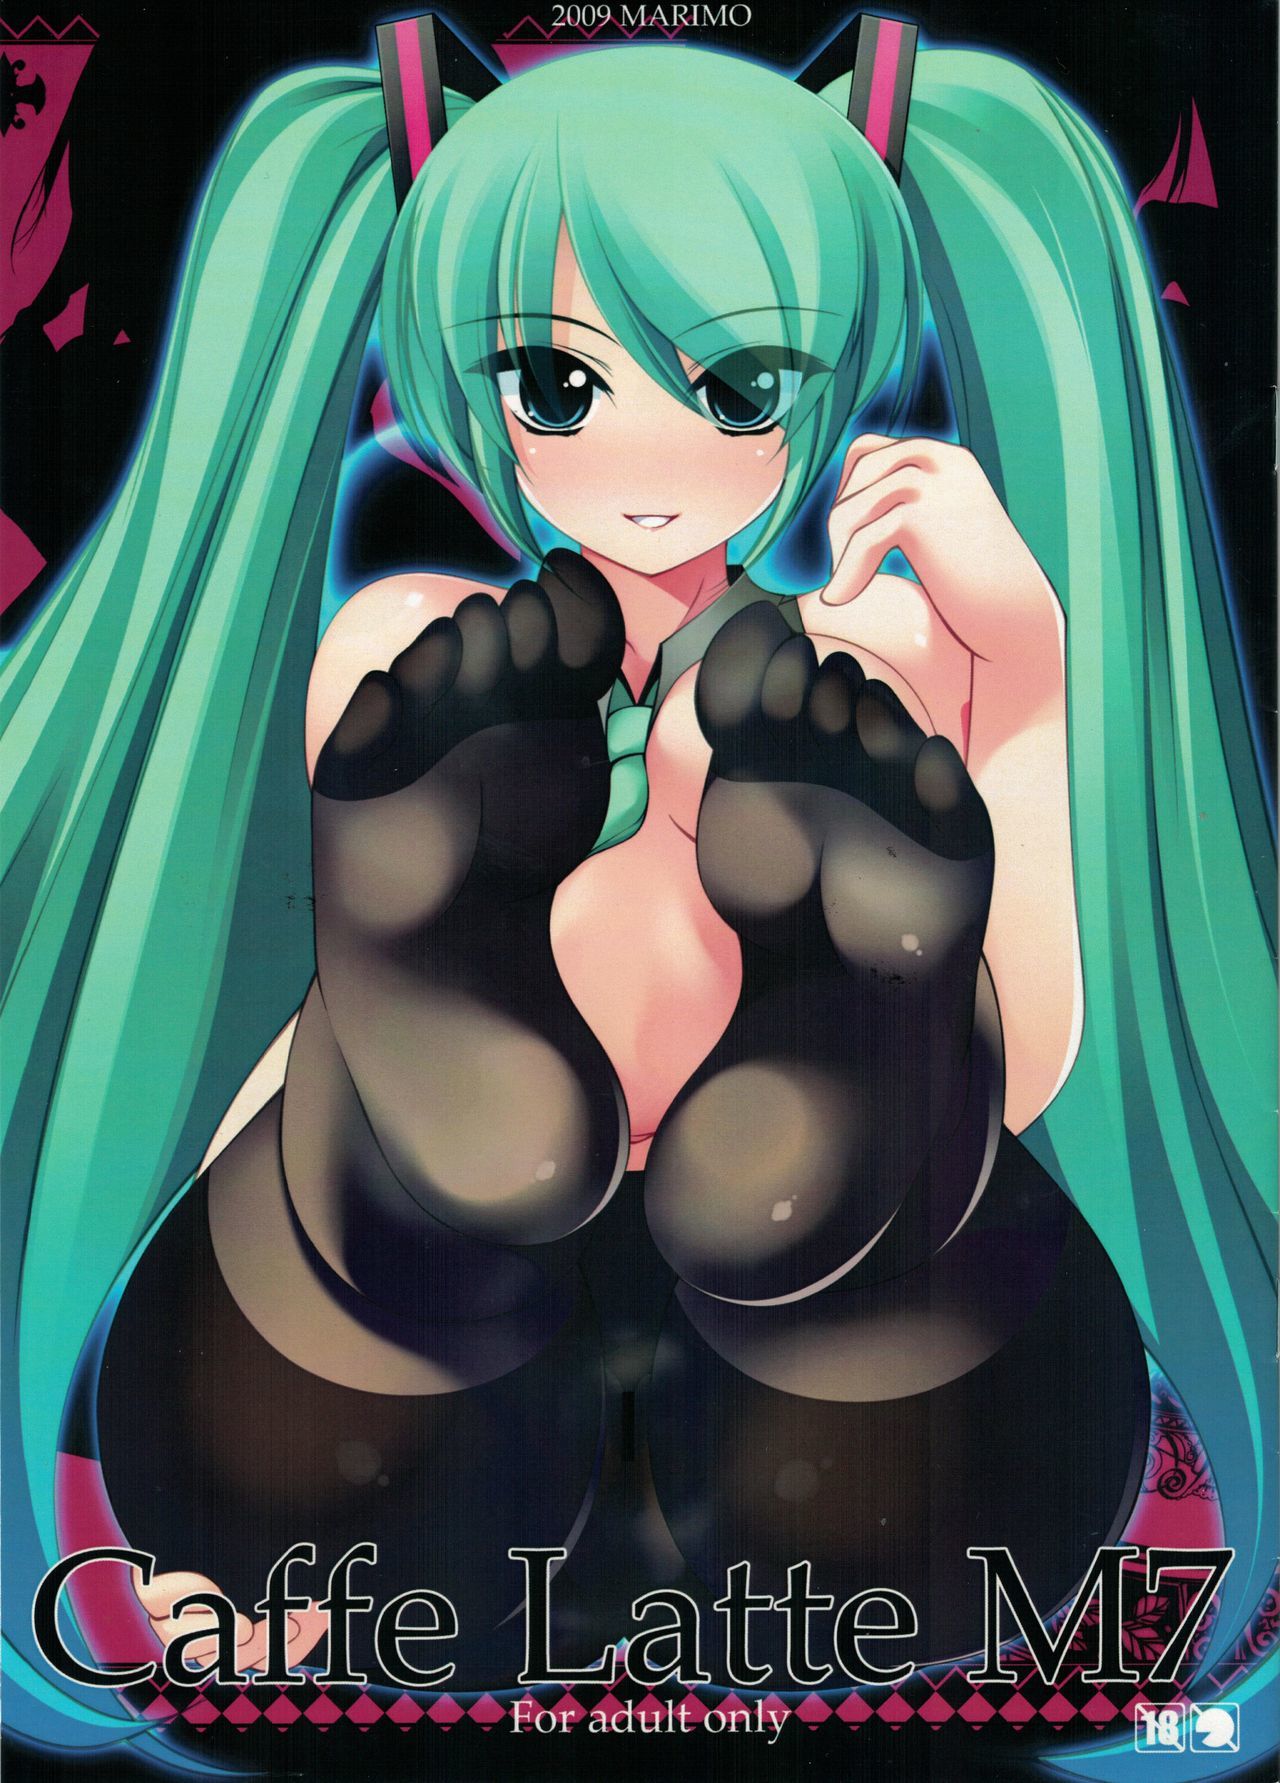 miku hatsune - sorted by number of objects - Free Hentai